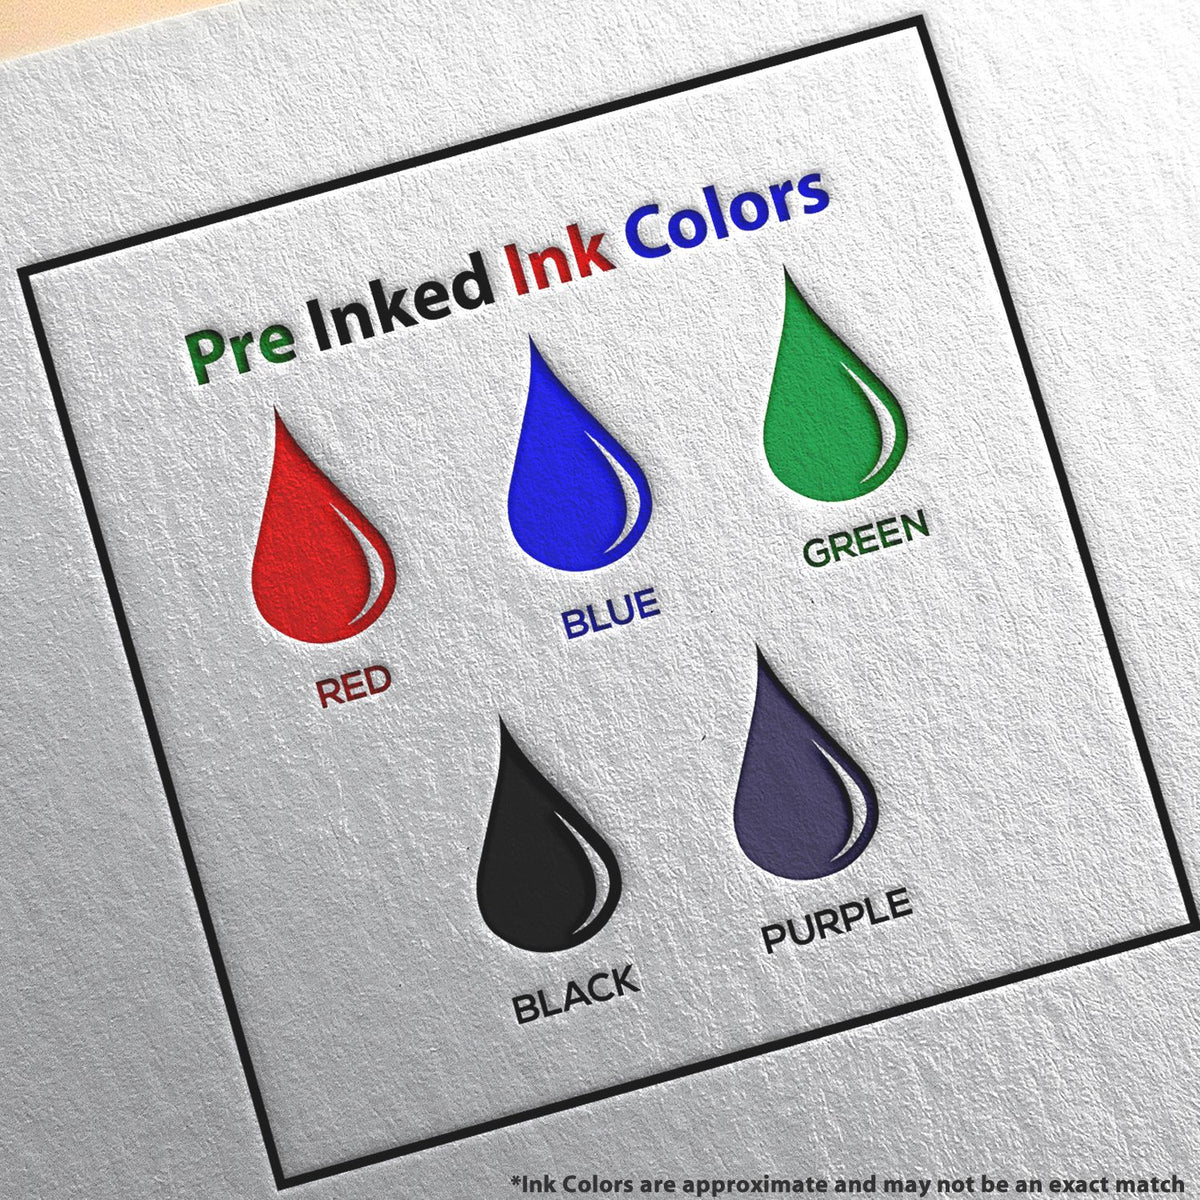 A picture showing the different ink colors or hues available for the MaxLight Premium Pre-Inked Kansas State Seal Notarial Stamp product.